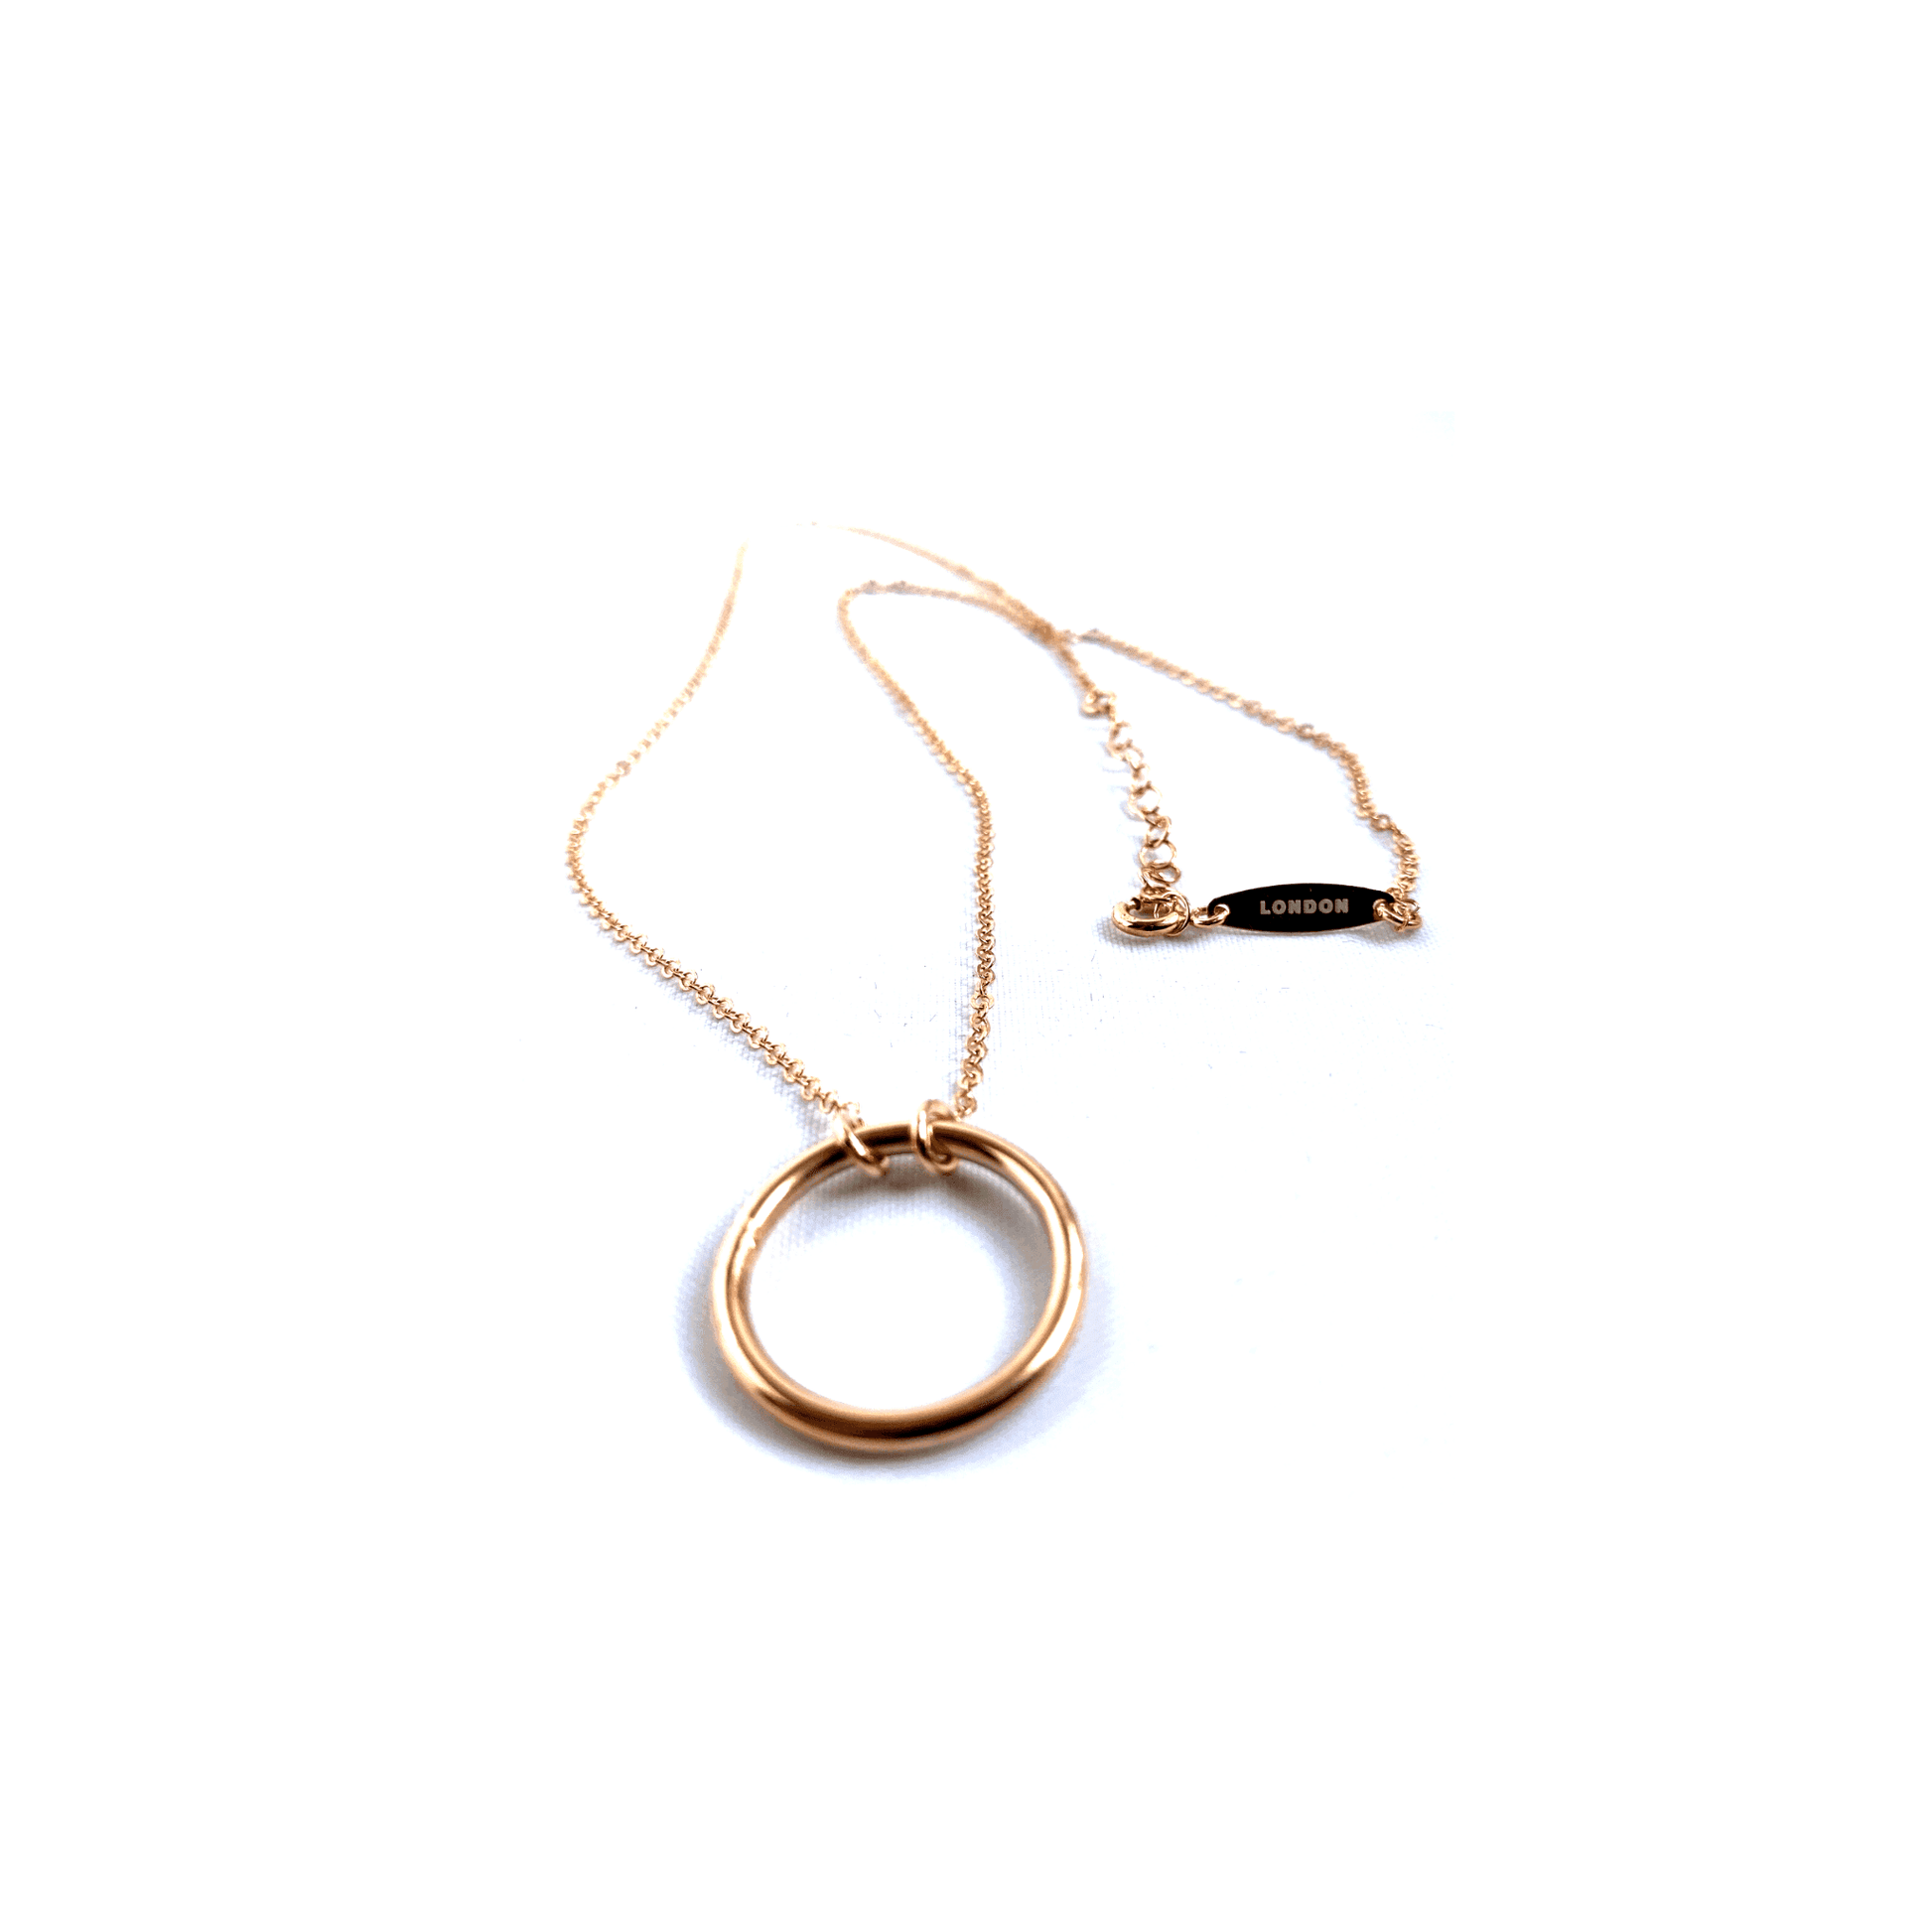 Silver Circle Necklace, Sterling Silver Ring Necklace, Geometric Necklace, Simple Dainty Necklace, Delicate Necklace - Naked Nation UK